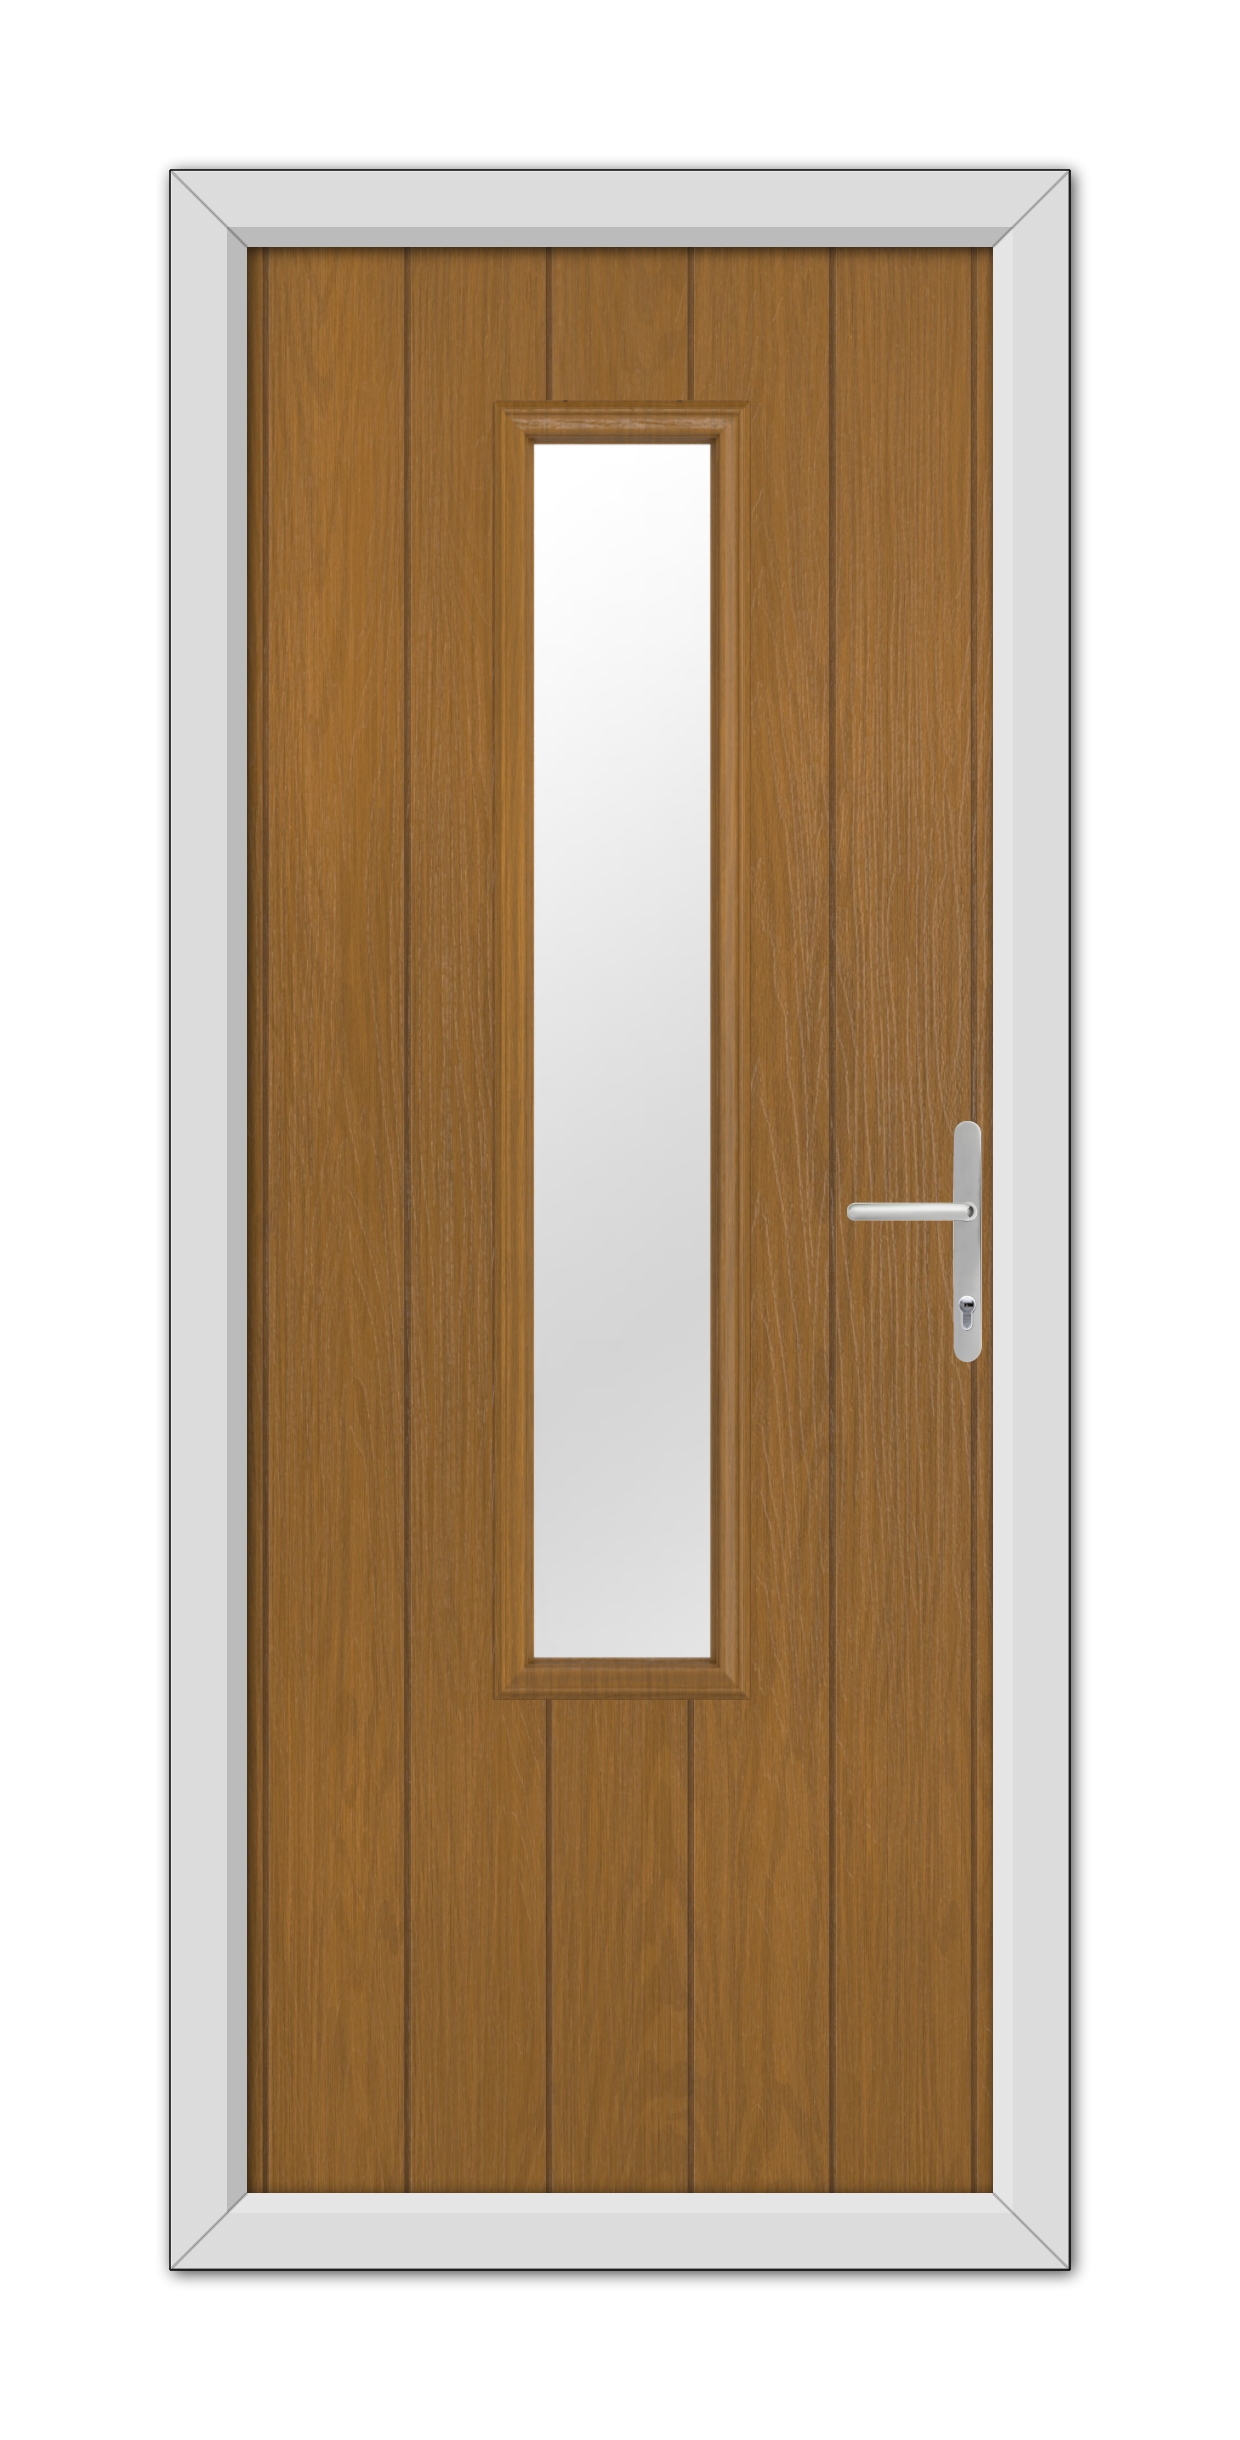 A Oak Abercorn Composite Door 48mm Timber Core with a vertical rectangular window and a metal handle, set within a white frame.